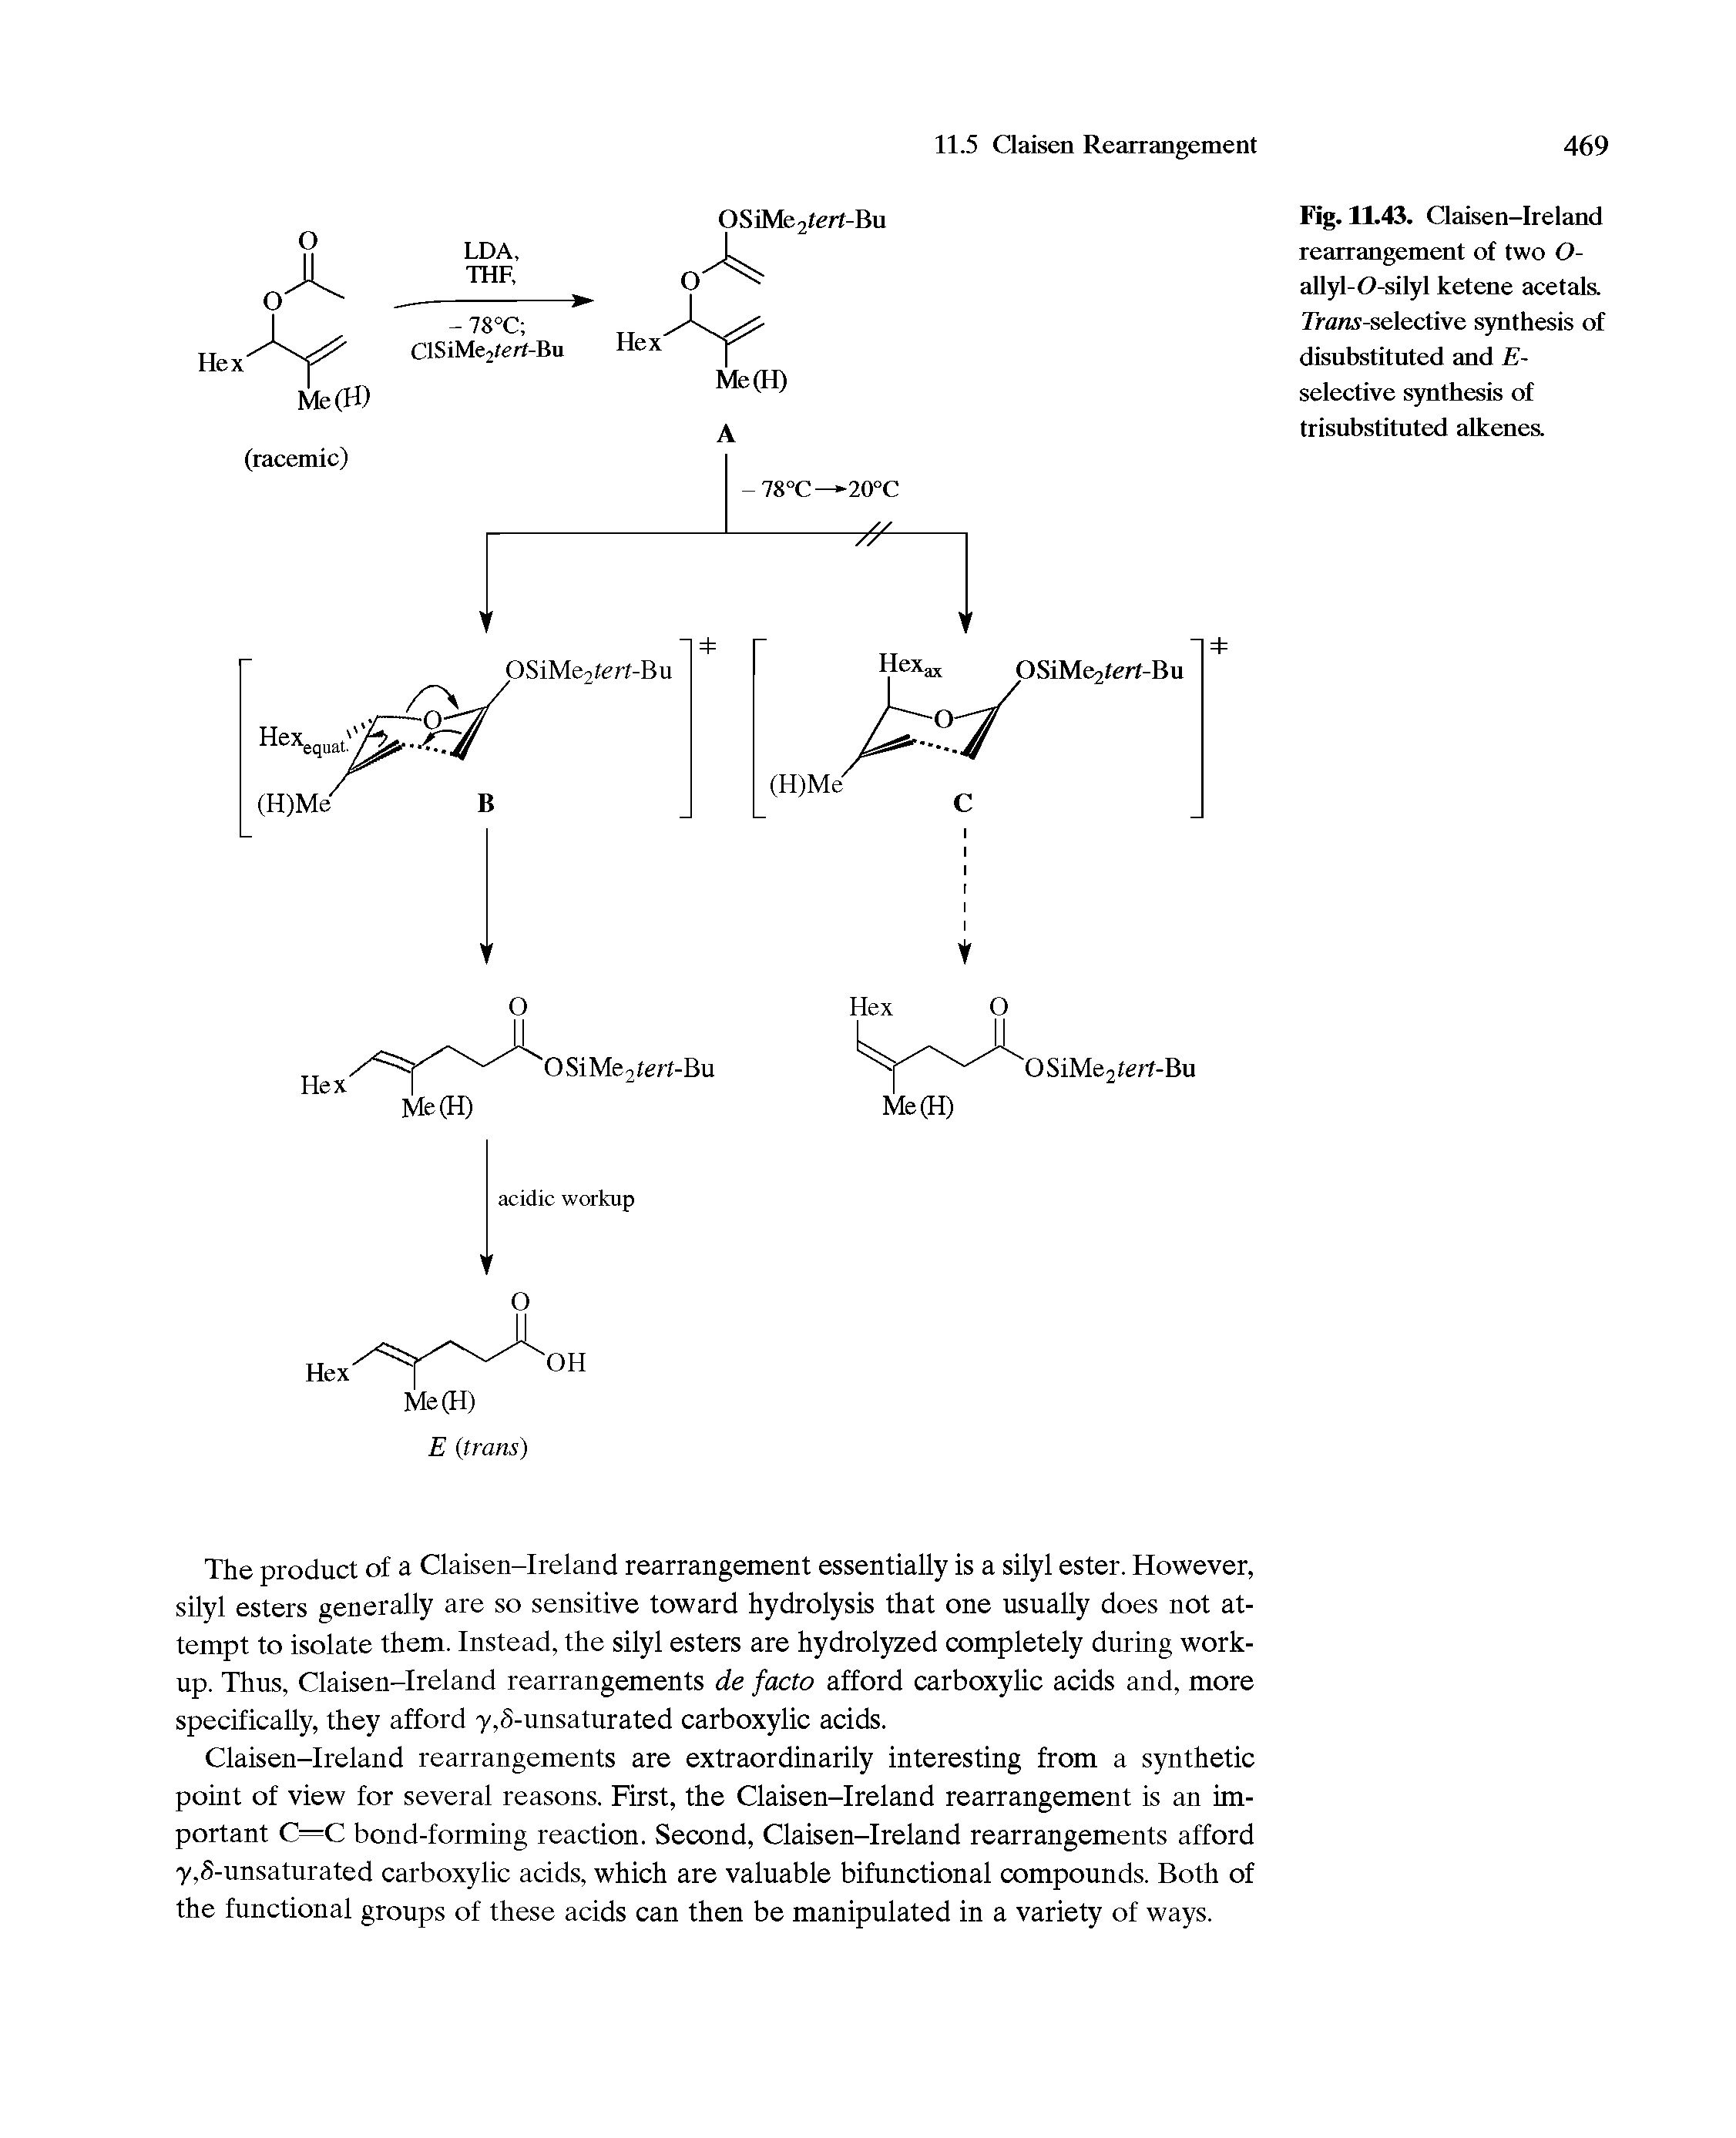 Fig. 11.43. Claisen-Ireland rearrangement of two O-allyl-O-silyl ketene acetals. 7ran.v-sclective synthesis of disubstituted and E-selective synthesis of trisubstituted alkenes.